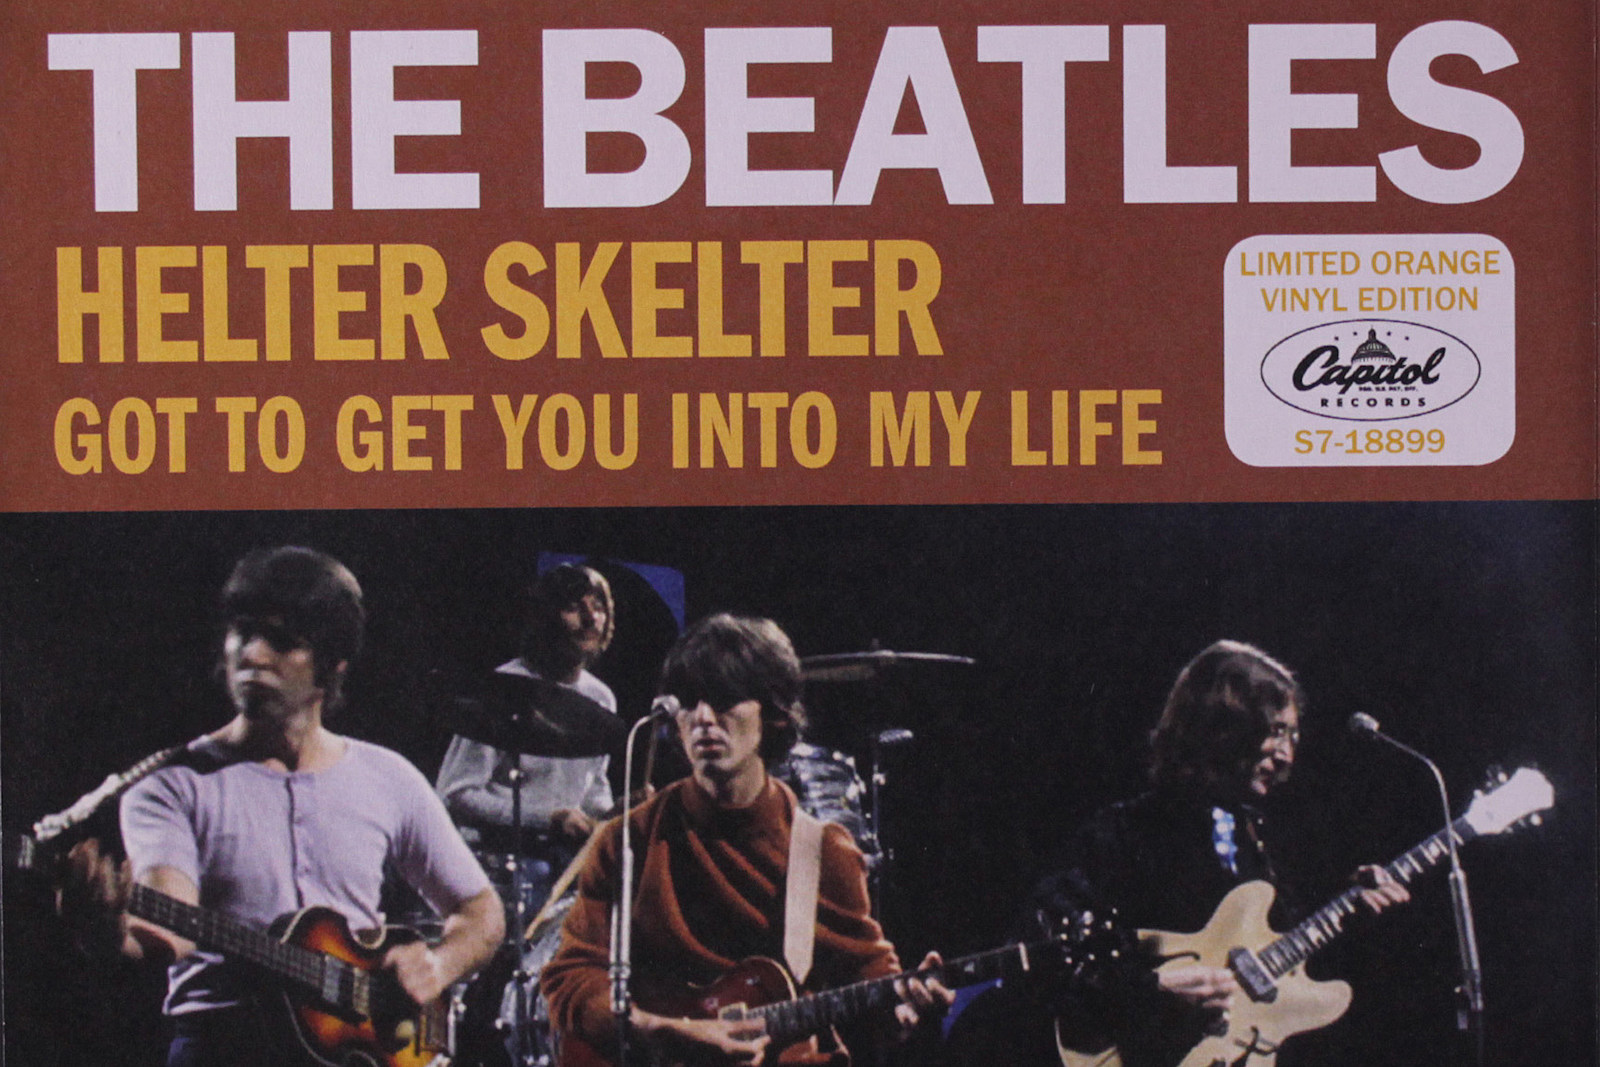 Helter Skelter - The Beatles - single cover